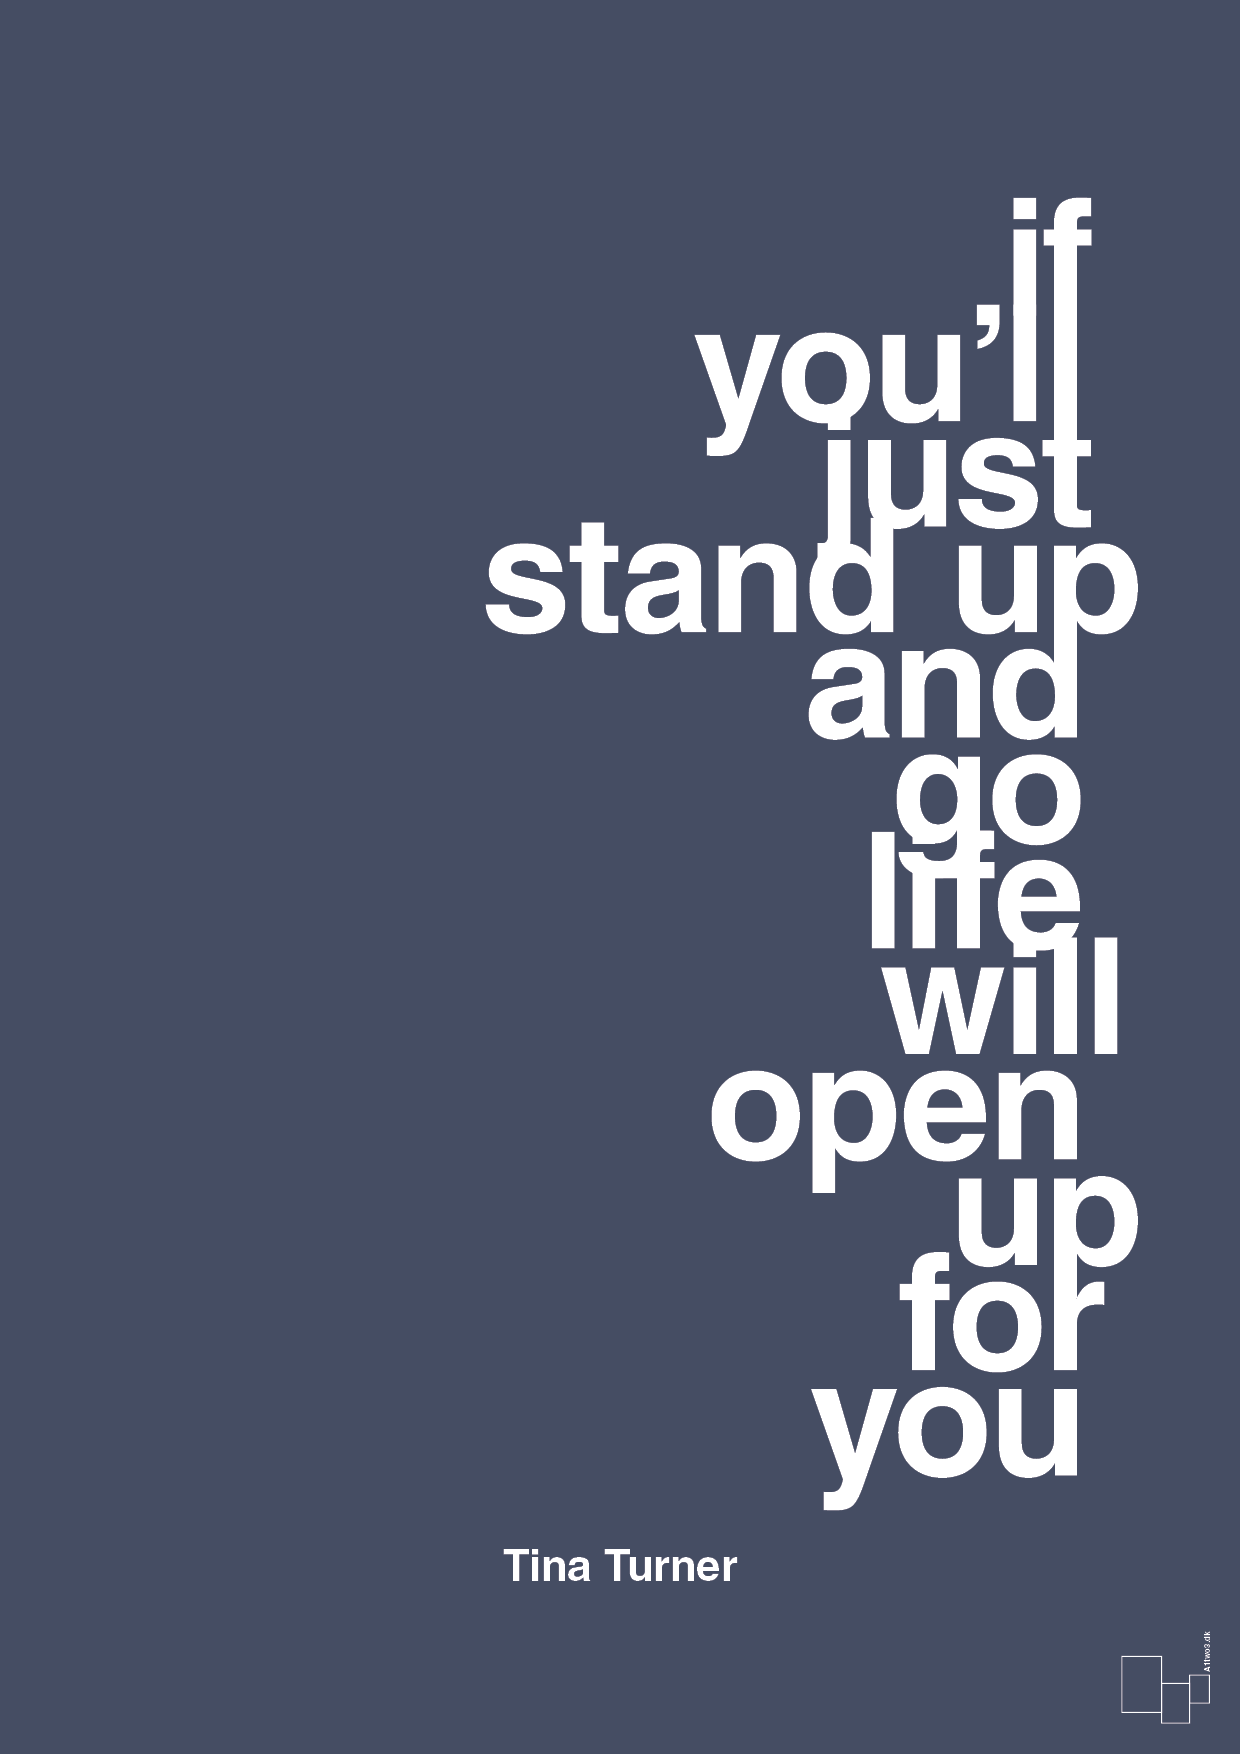 if you’ll just stand up and go life will open up for you - Plakat med Citater i Petrol